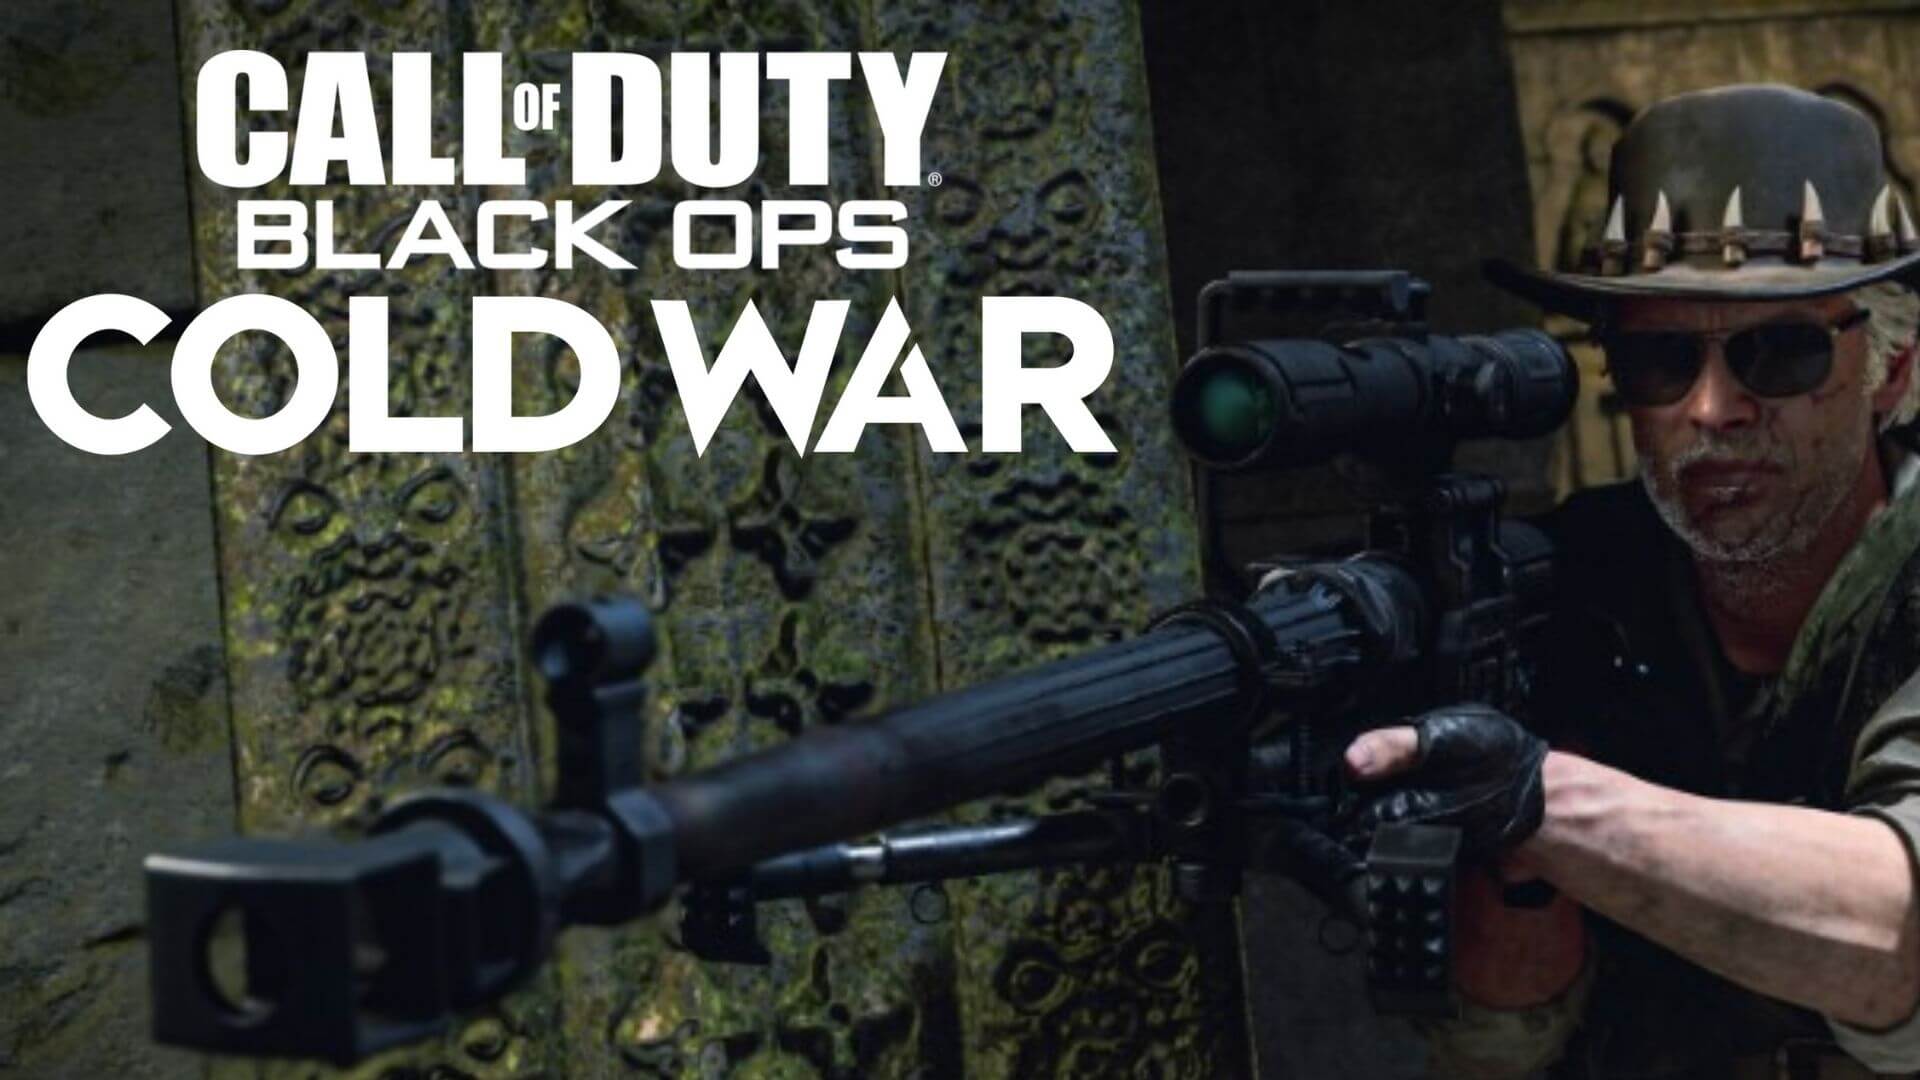 You can unlock CoD: Black Ops Cold War, Warzone's ZRG 20mm sniper